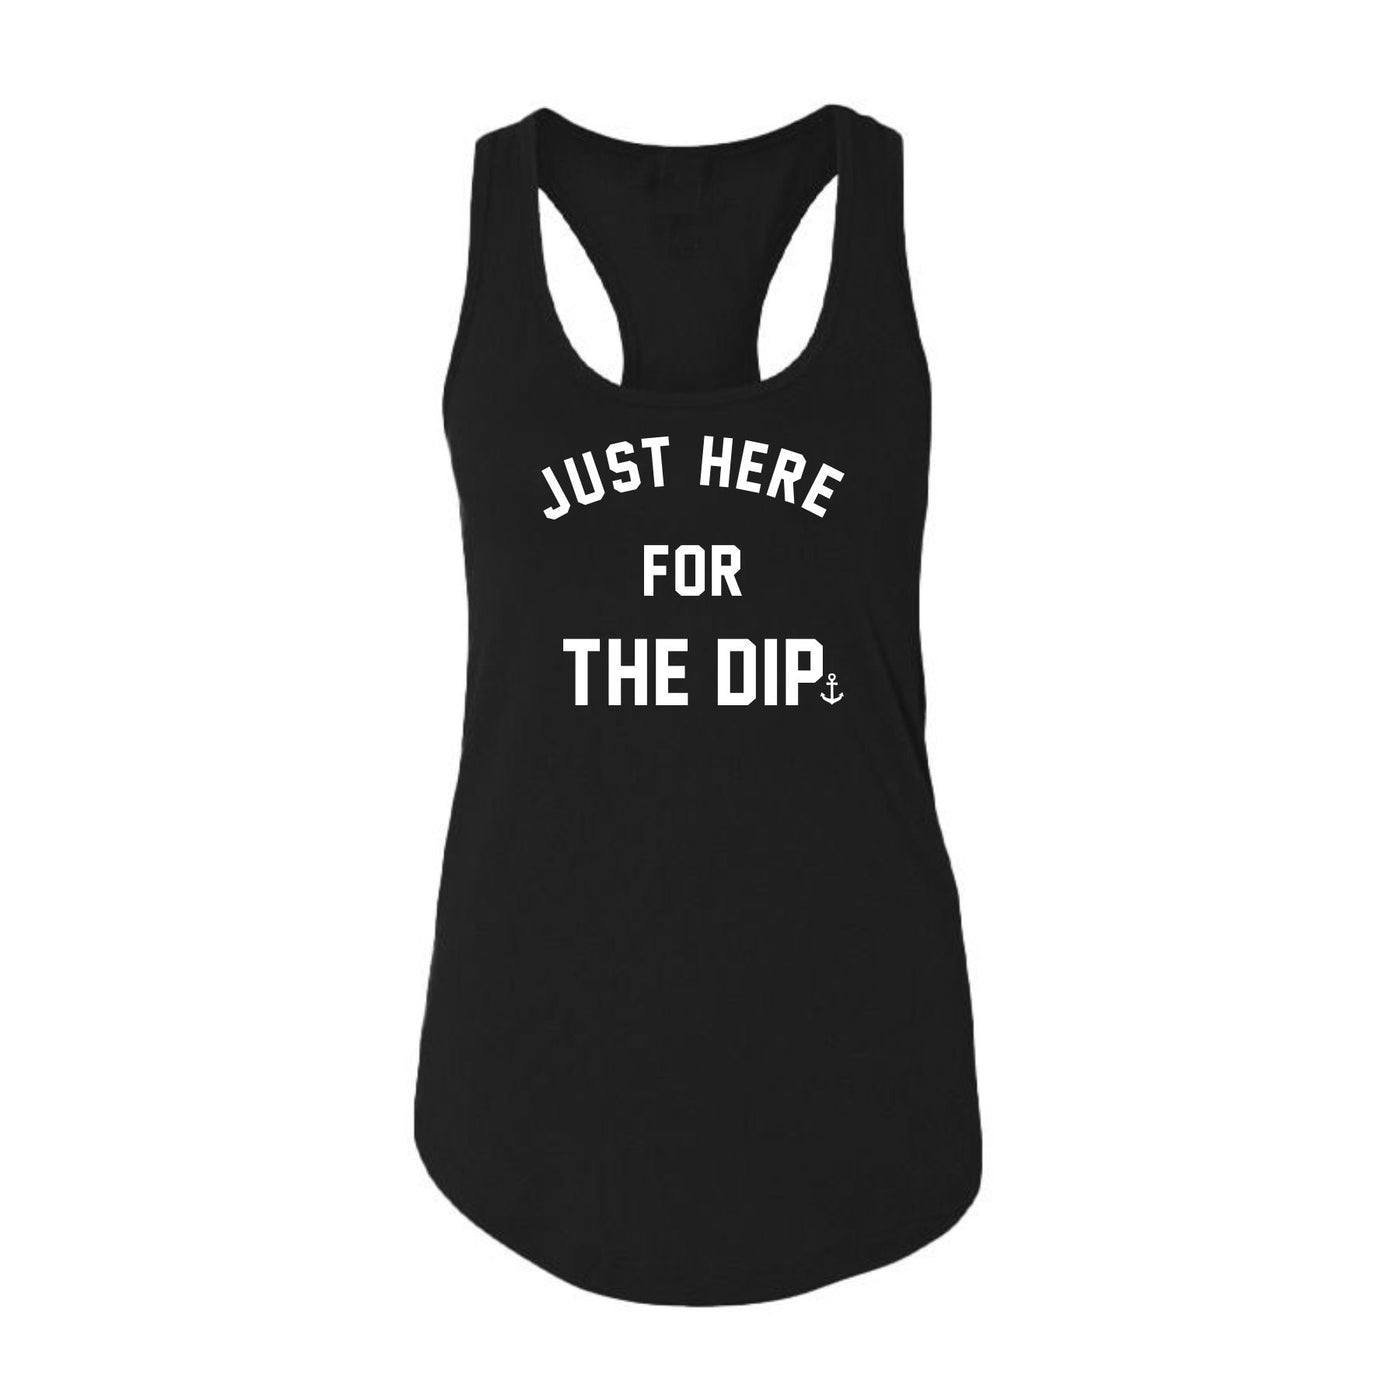 "Just Here For The Dip" Ladies' Tank Top